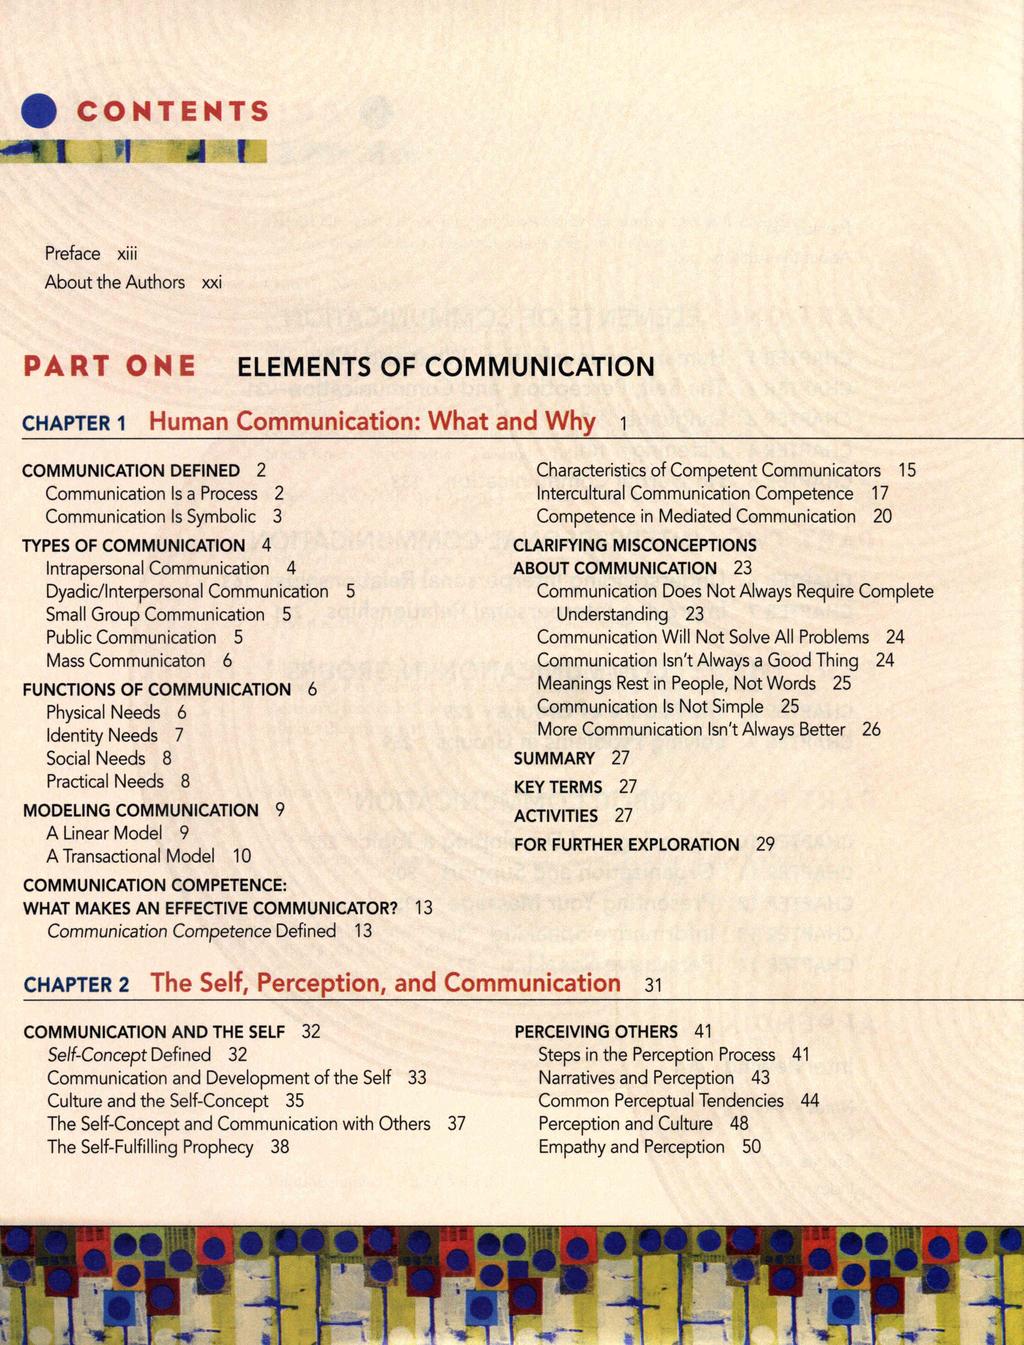 e CONTENTS Preface XIII About the Authors xxi PART ONE ELEMENTS OF COMMUNICATION CHAPTER 1 Human Communication: What and Why COMMUNICATION DEFINED 2 Communication Is a Process 2 Communication Is